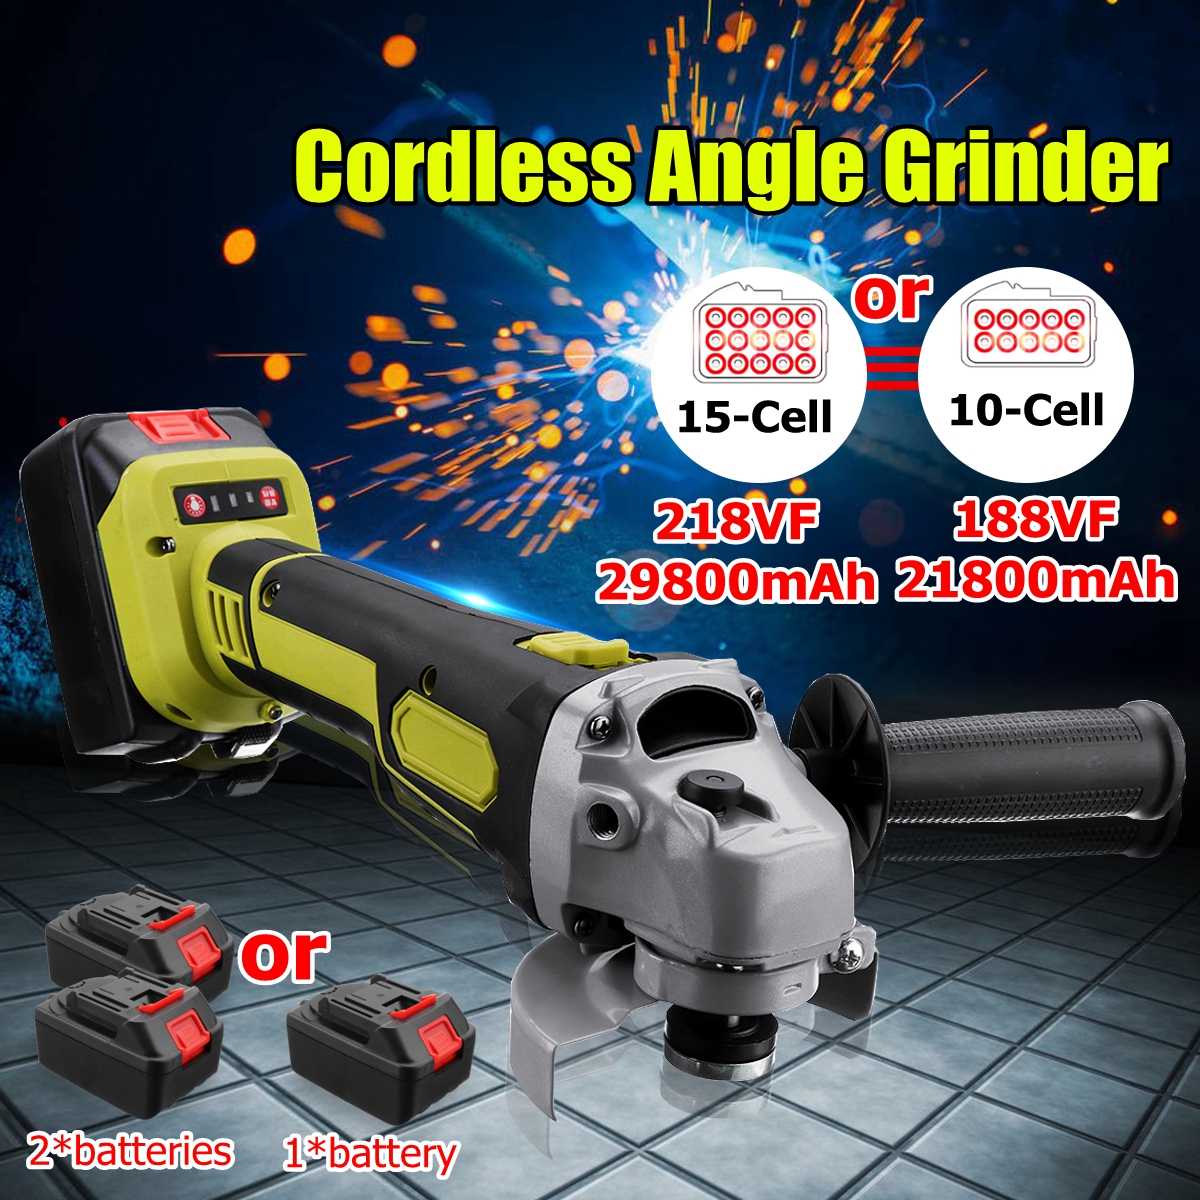 188VF218VF-Brushless-Cordless-Angle-Grinder-Electric-Power-Angle-Grinding-Cutting-W-1-or-2-Li-ion-Ba-1431177-2